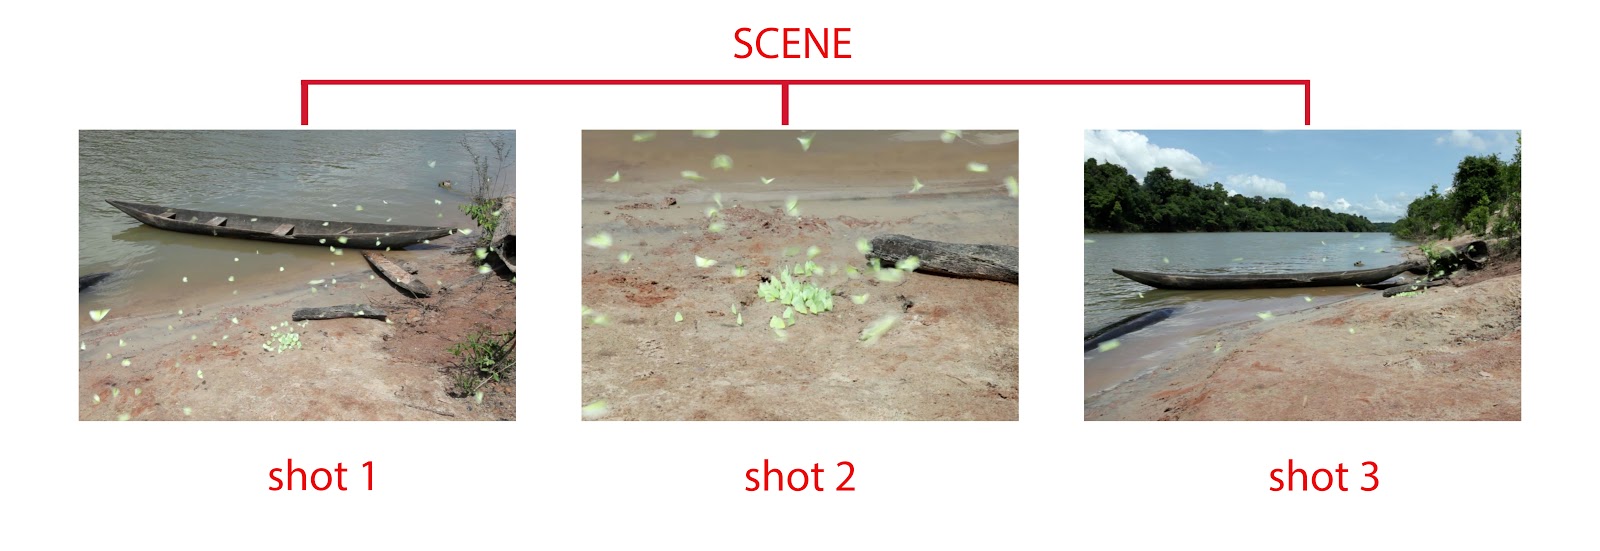 A scene is composed of multiple shots